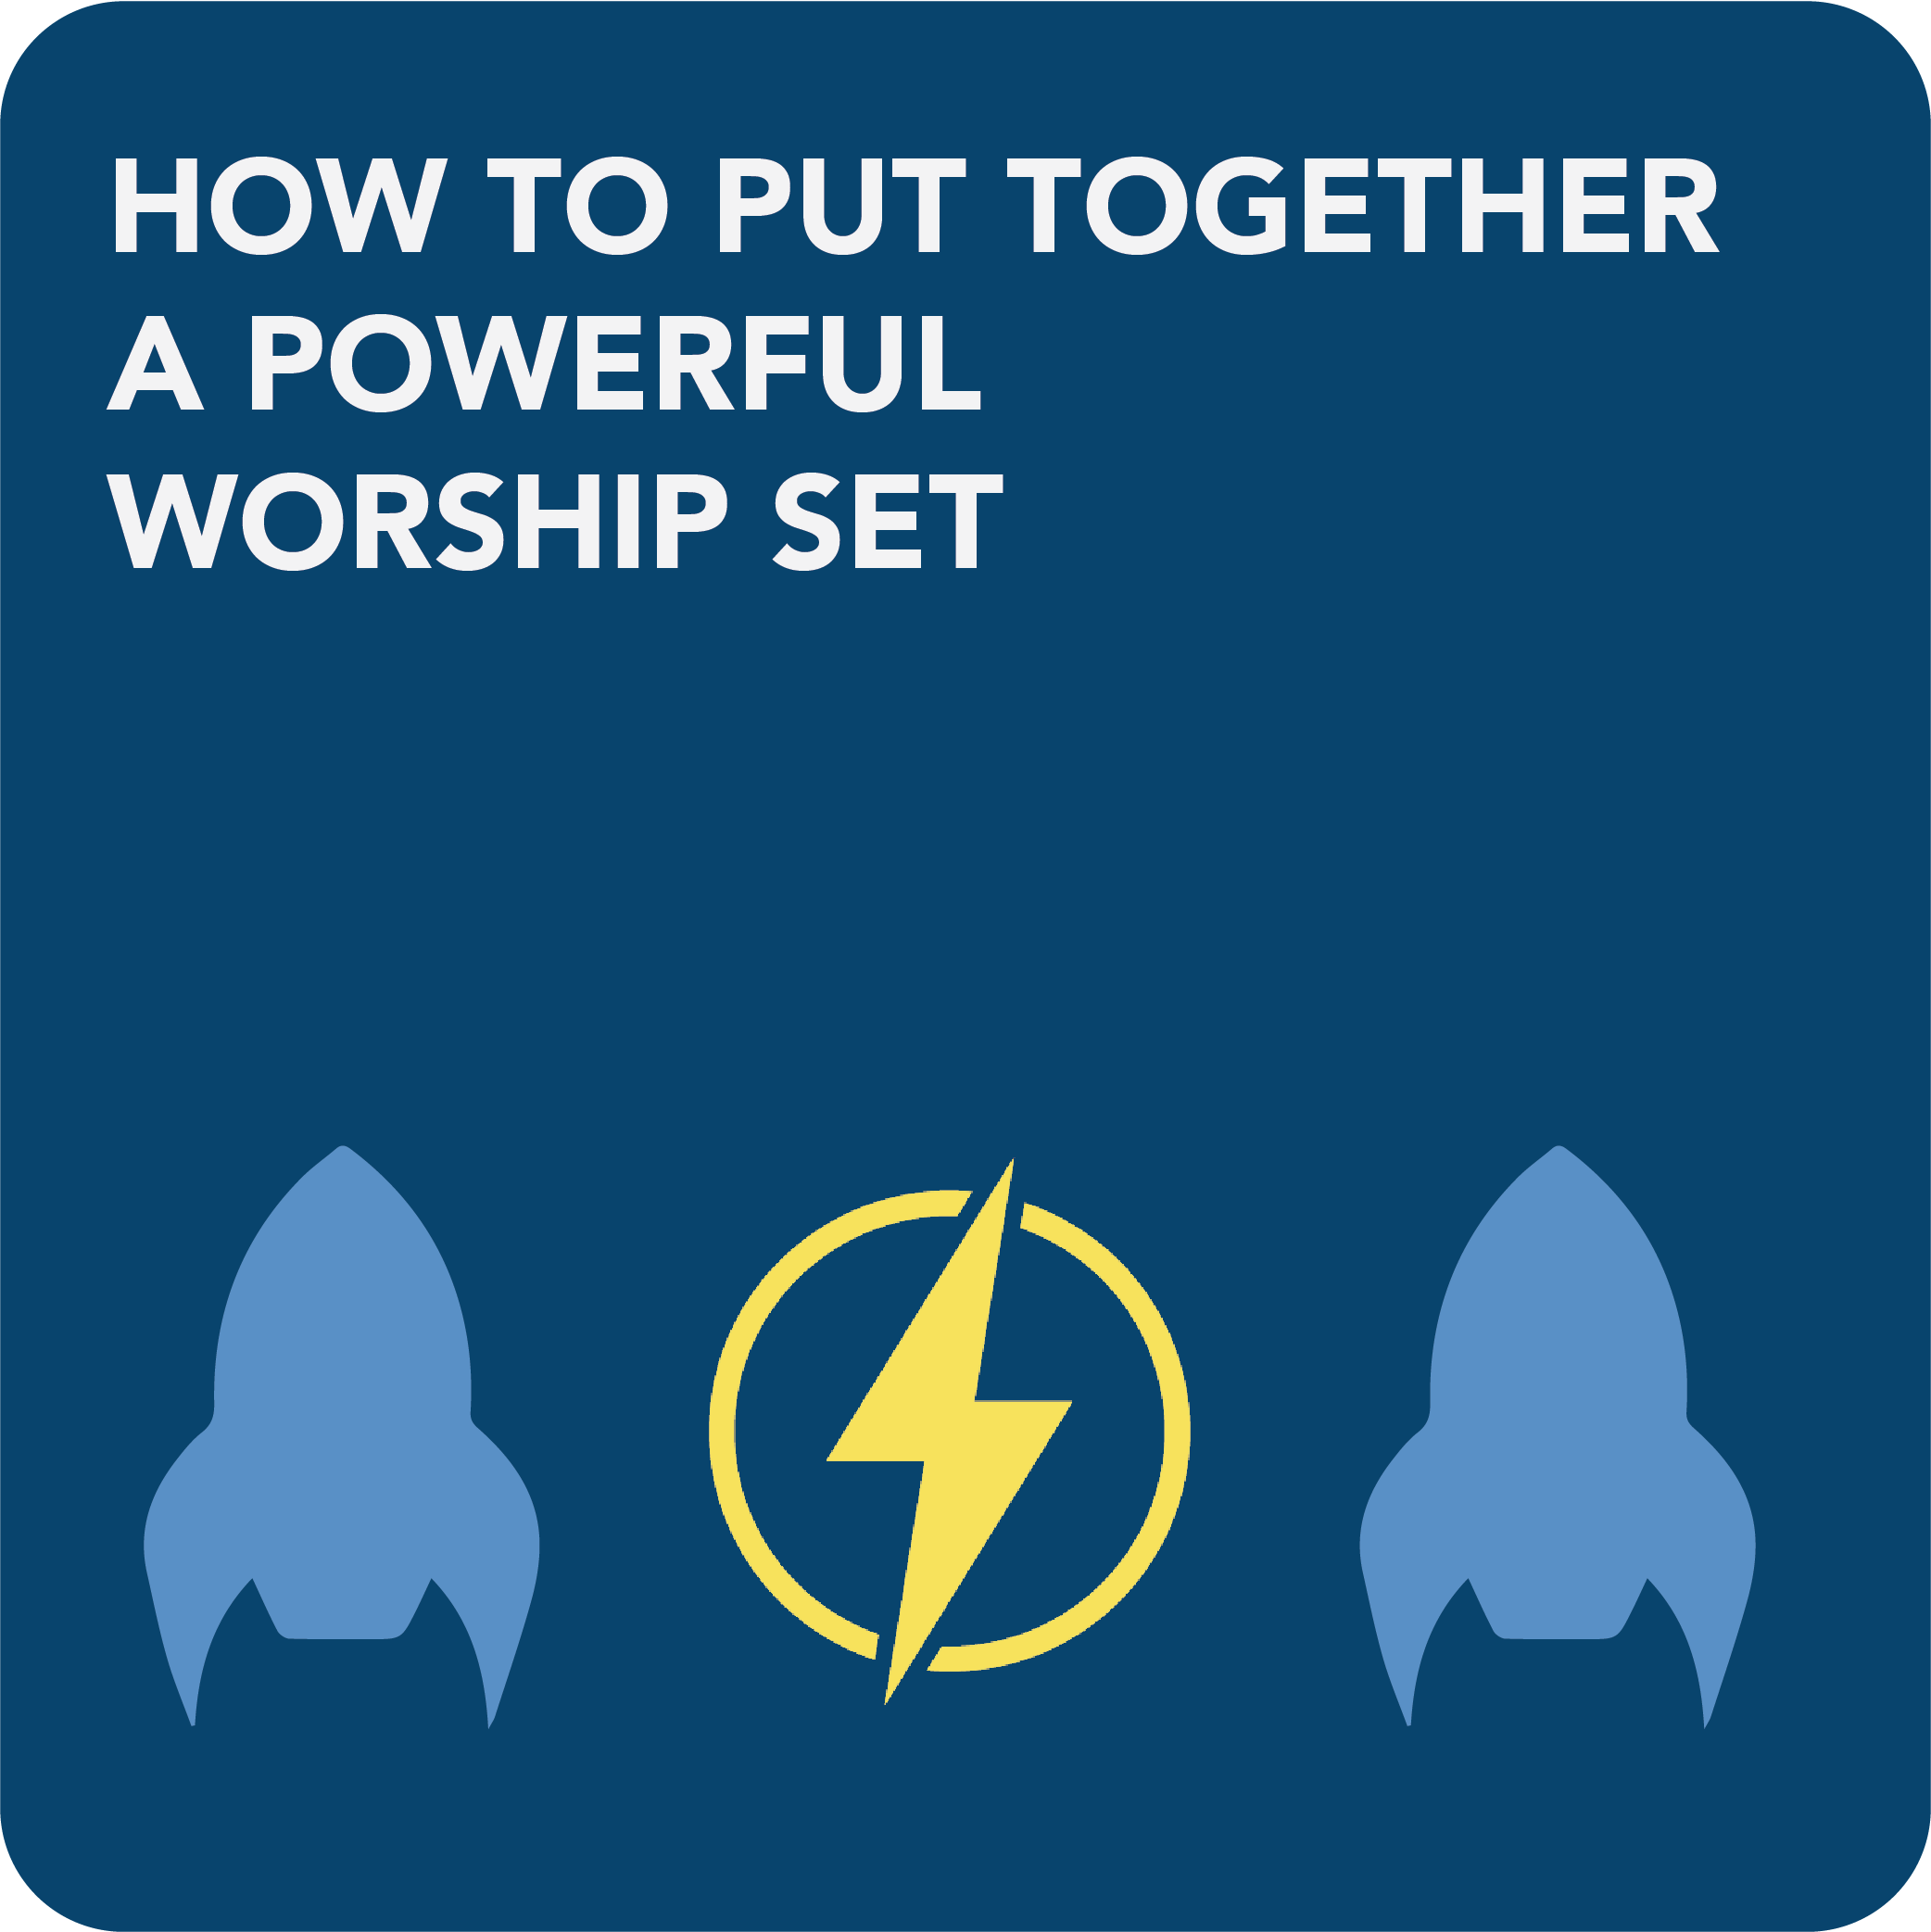 HOW TO PUT TOGETHER A POWERFUL WORSHIP SET